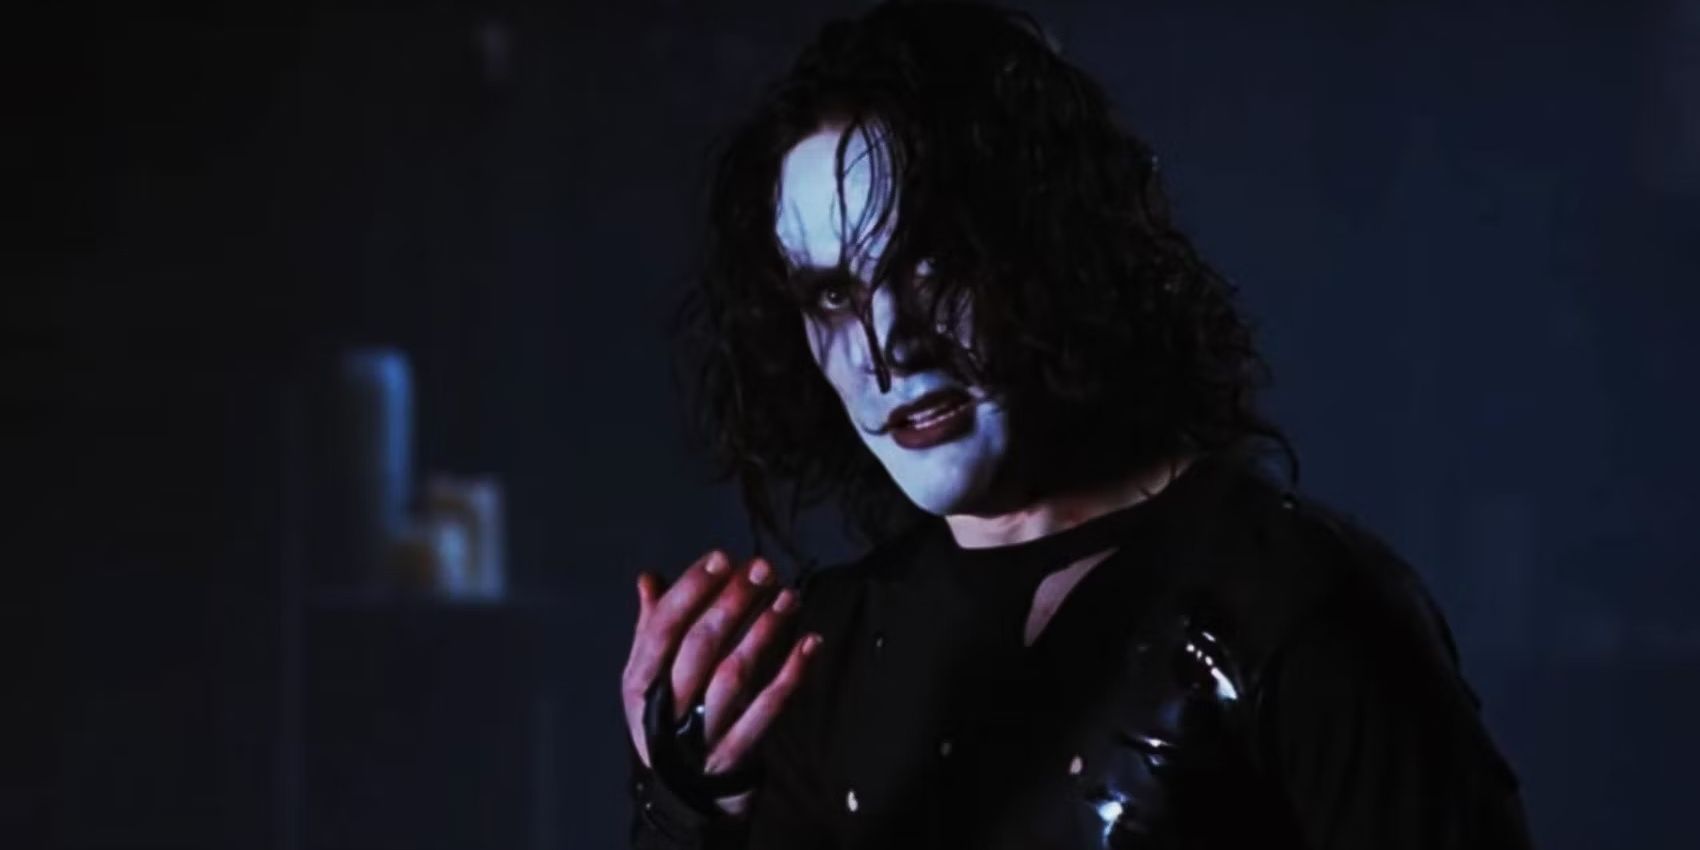 Brandon Lee holding his hand as the titular character in The Crow 1994